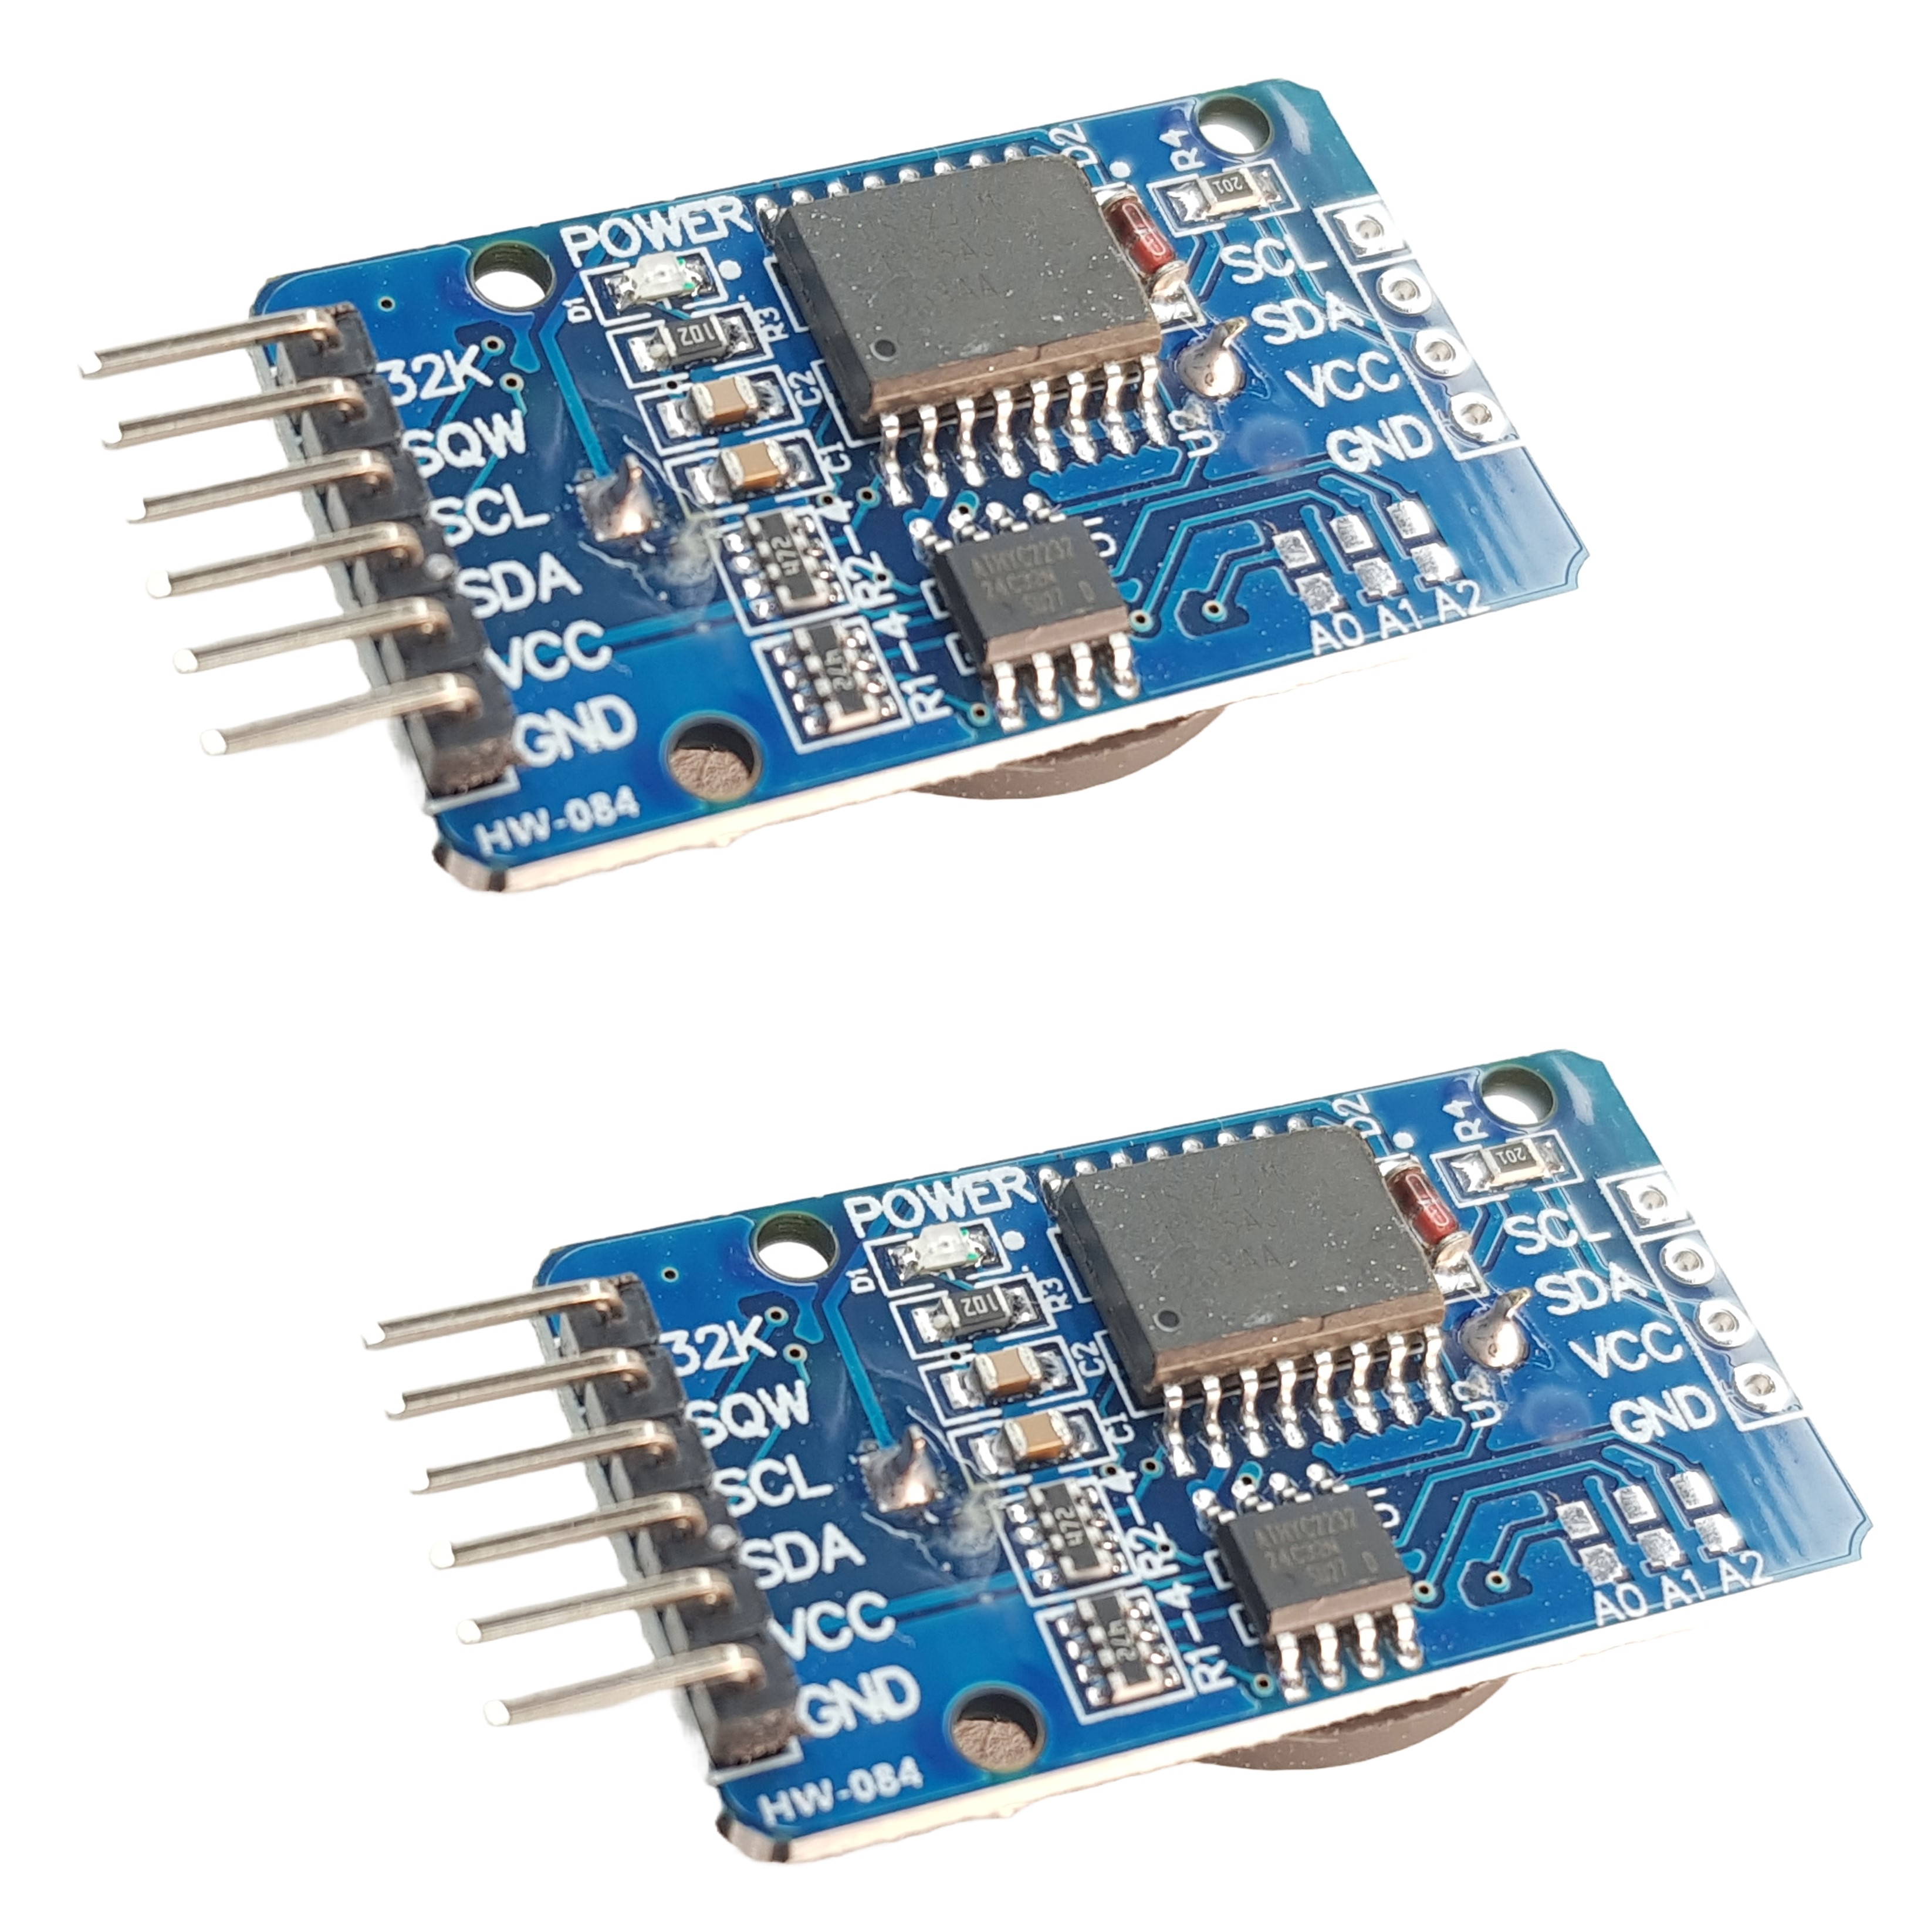 DIYables DS3231 RTC Real Time Clock Module